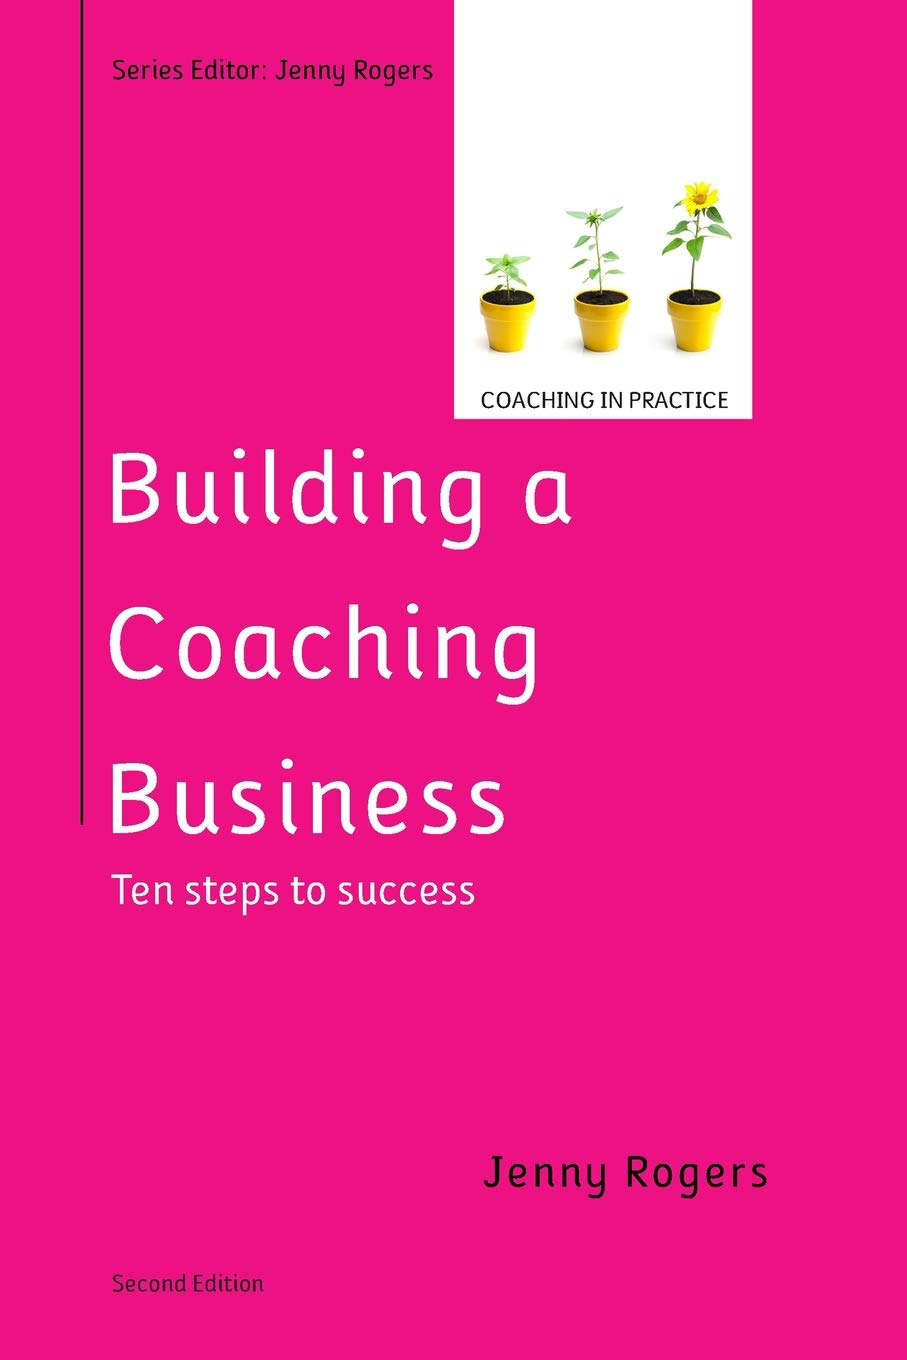 Building a Coaching Business by Jenny Rogers